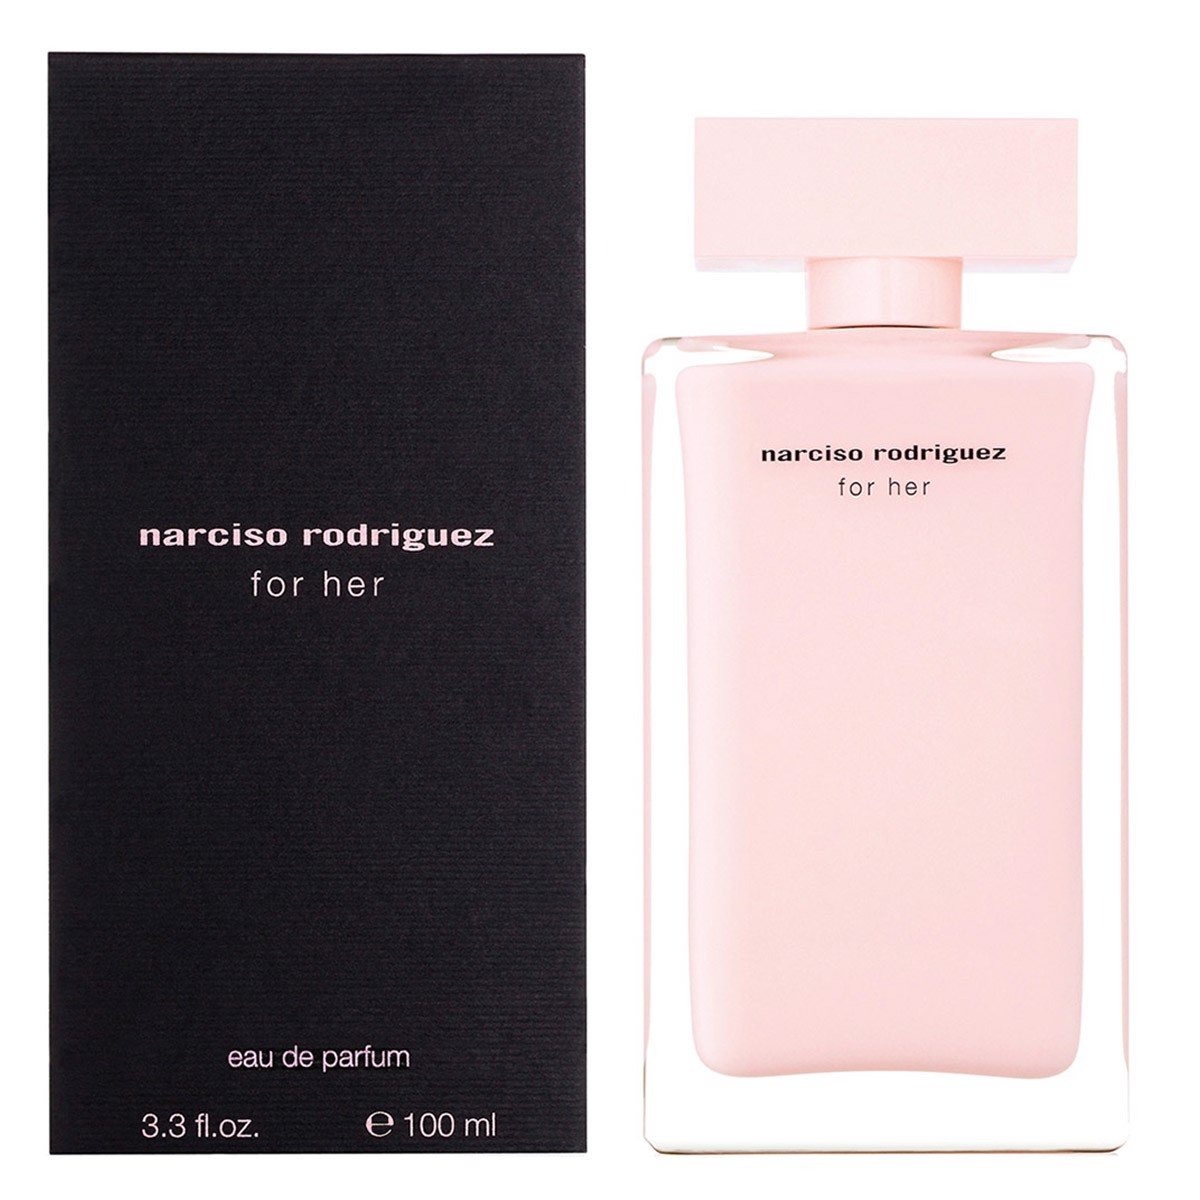 nuoc hoa narciso rodriguez for her 100ml